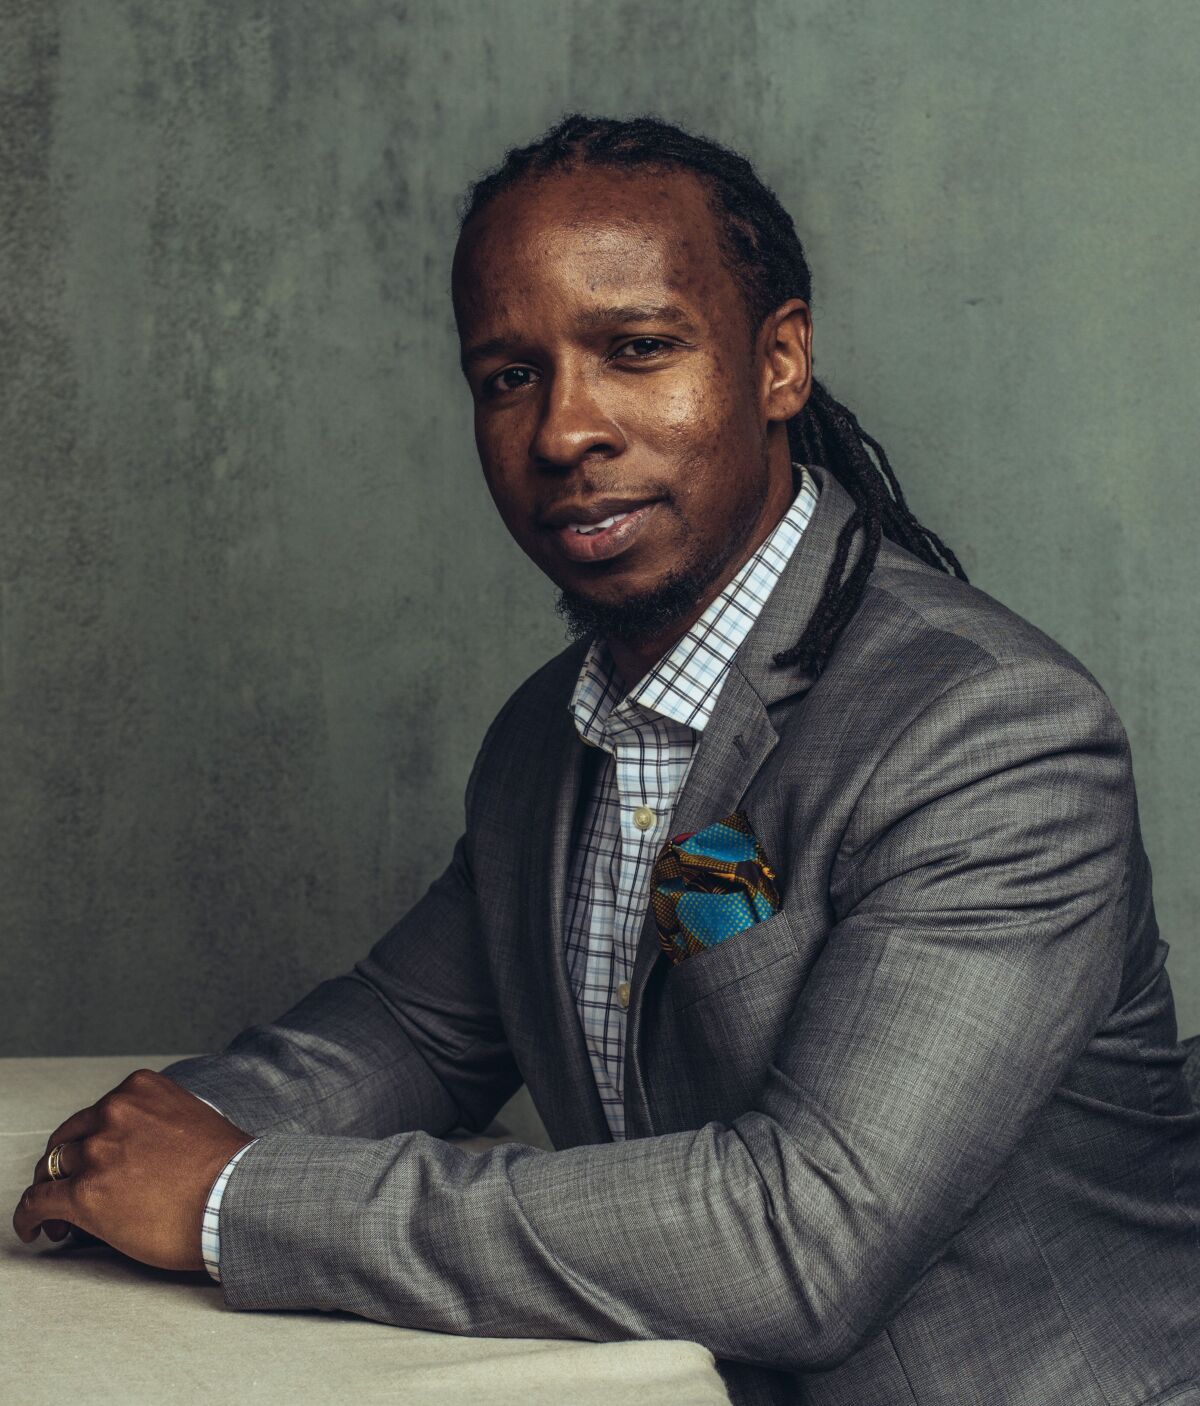 Author Ibram Kendi will participate in an online discussion of race through the National Conflict Resolution Center.